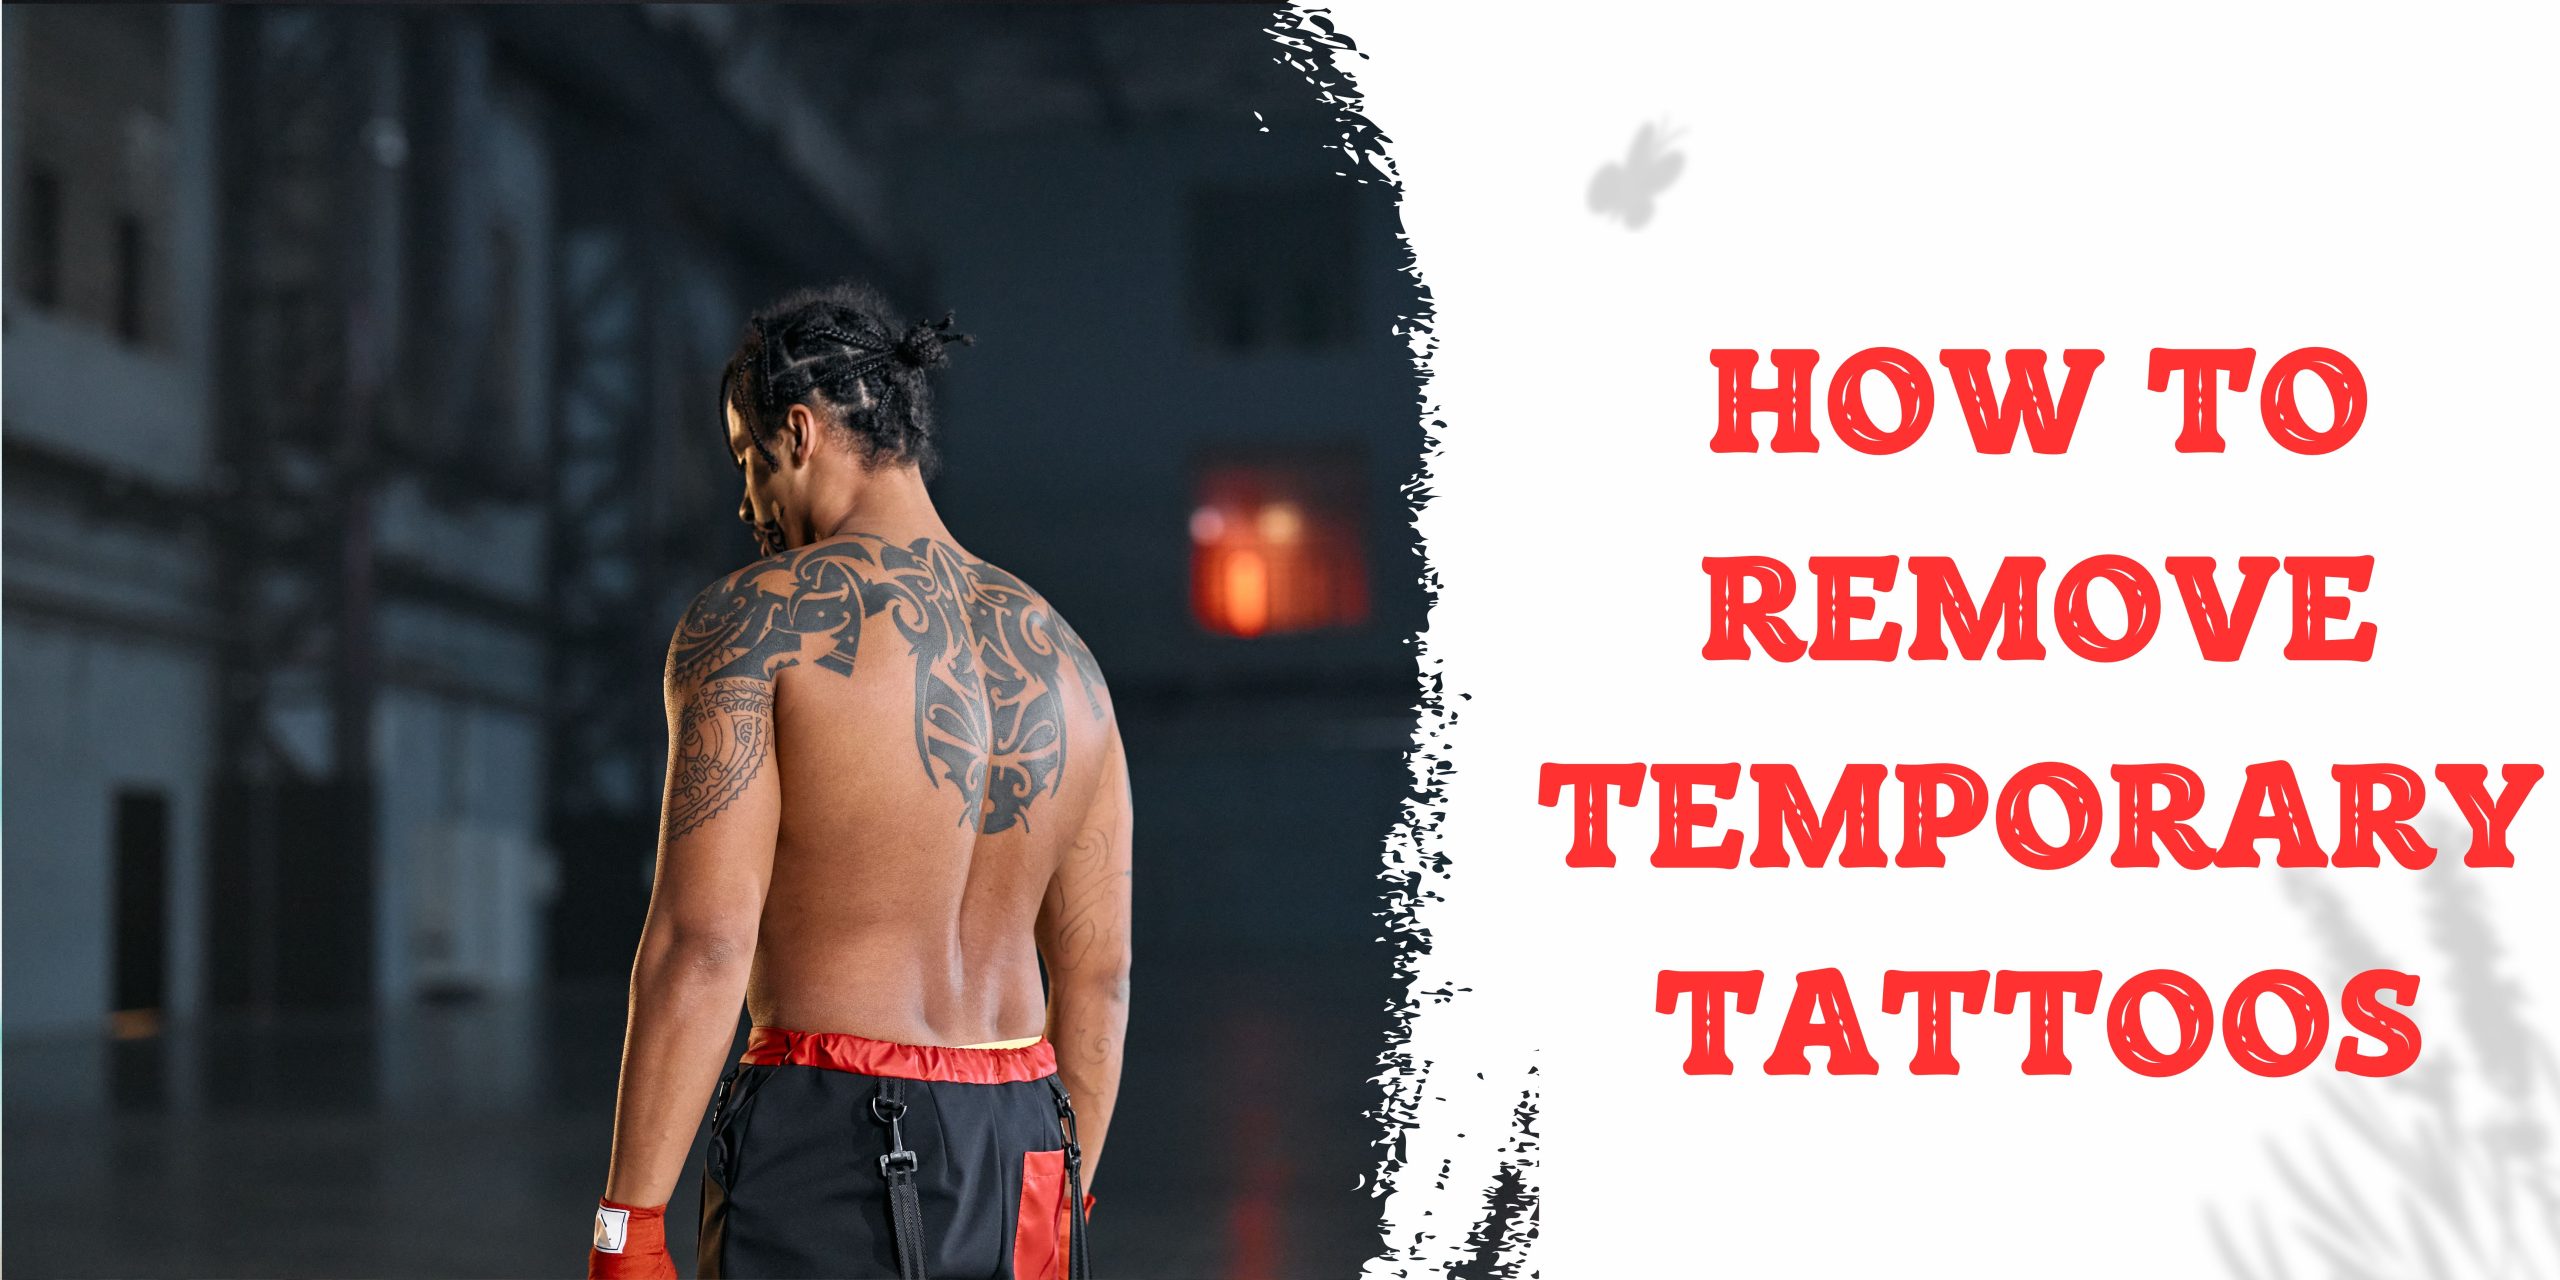 How To Remove Temporary Tattoos